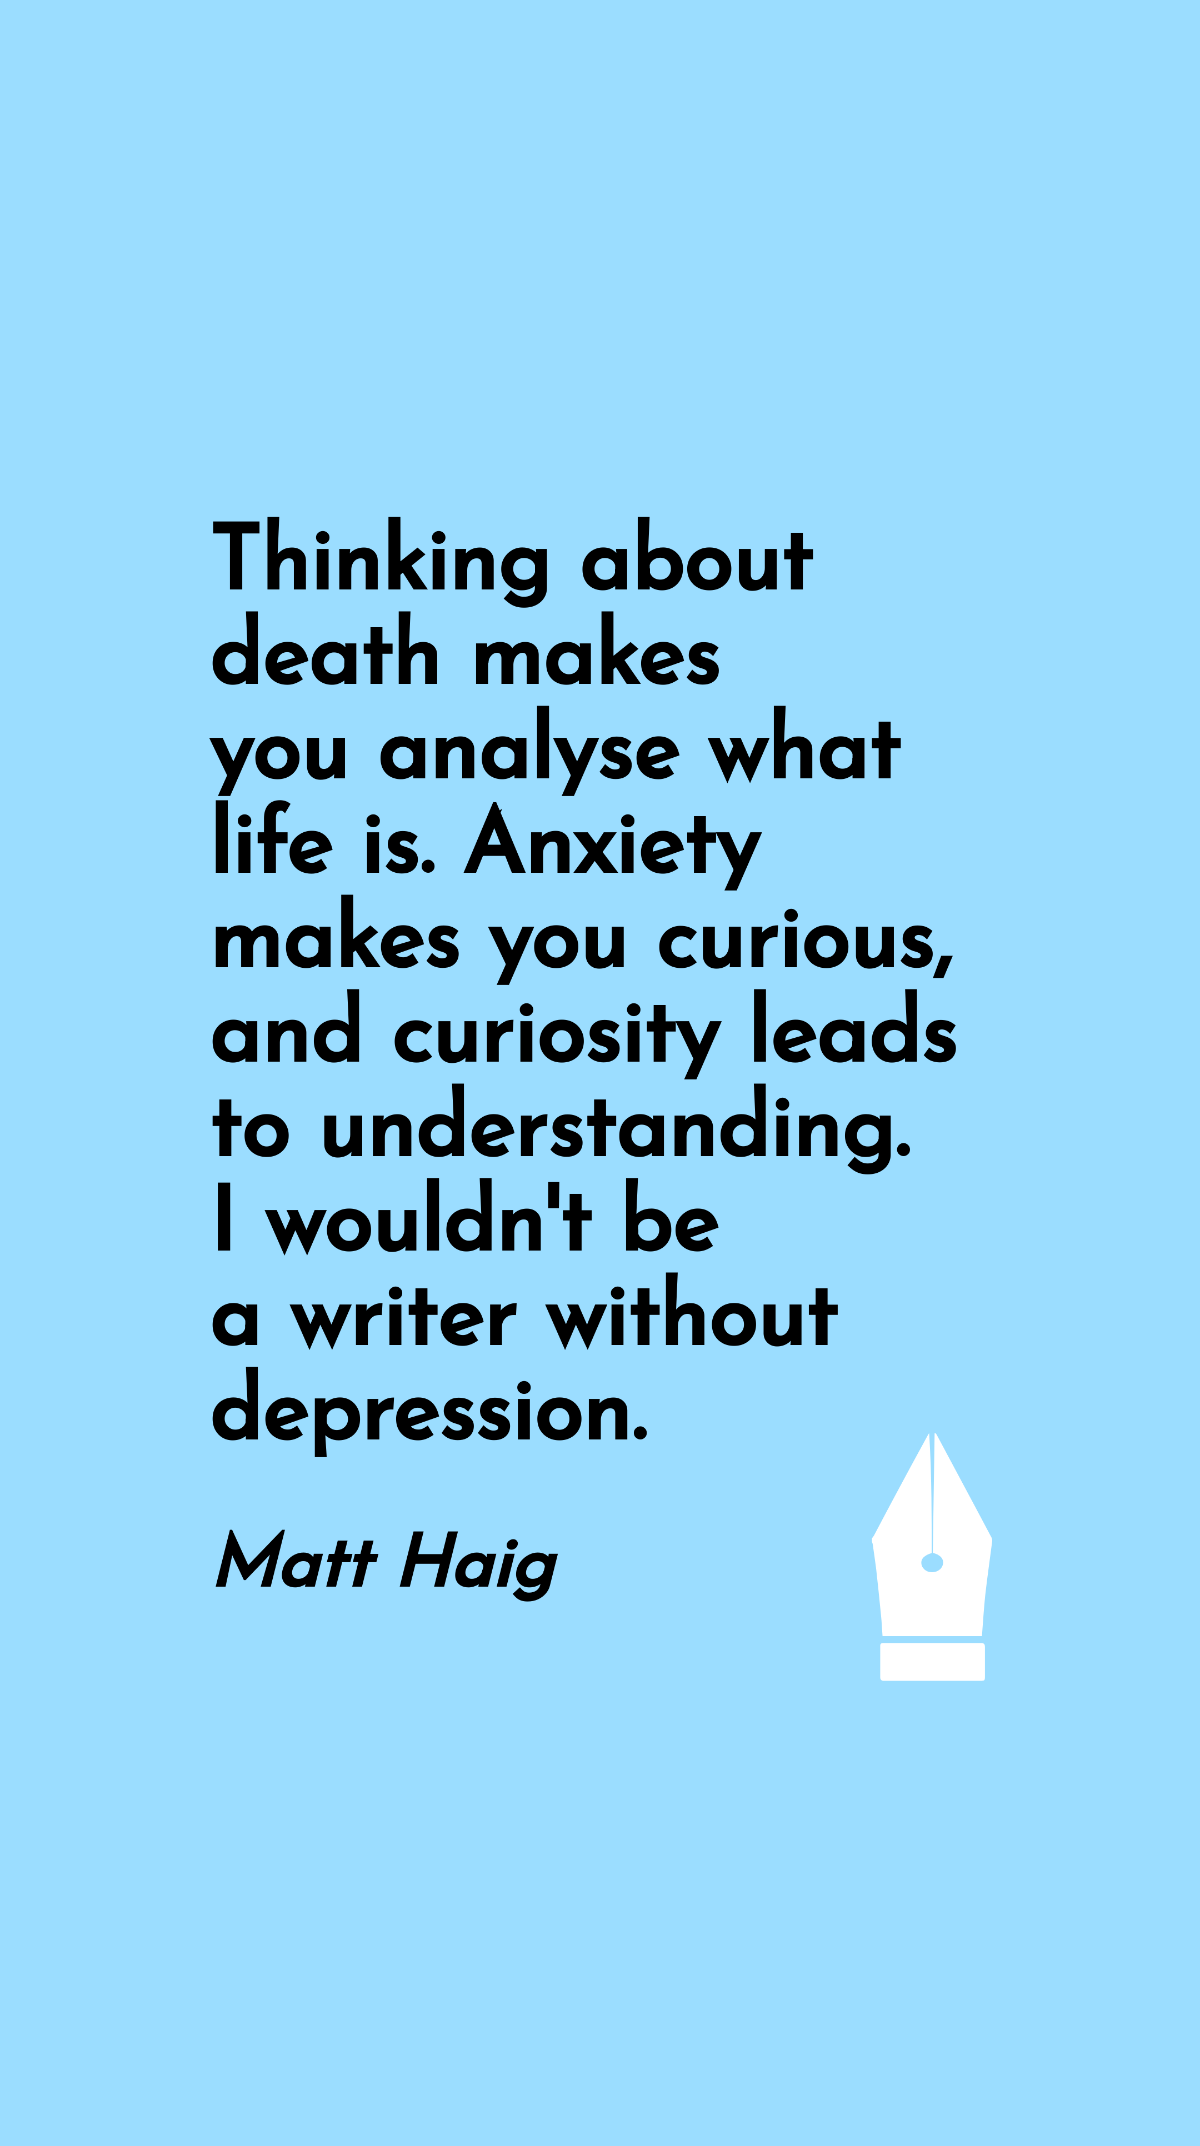 Free Matt Haig - Thinking about death makes you analyse what life is. Anxiety makes you curious, and curiosity leads to understanding. I wouldn't be a writer without depression. Template